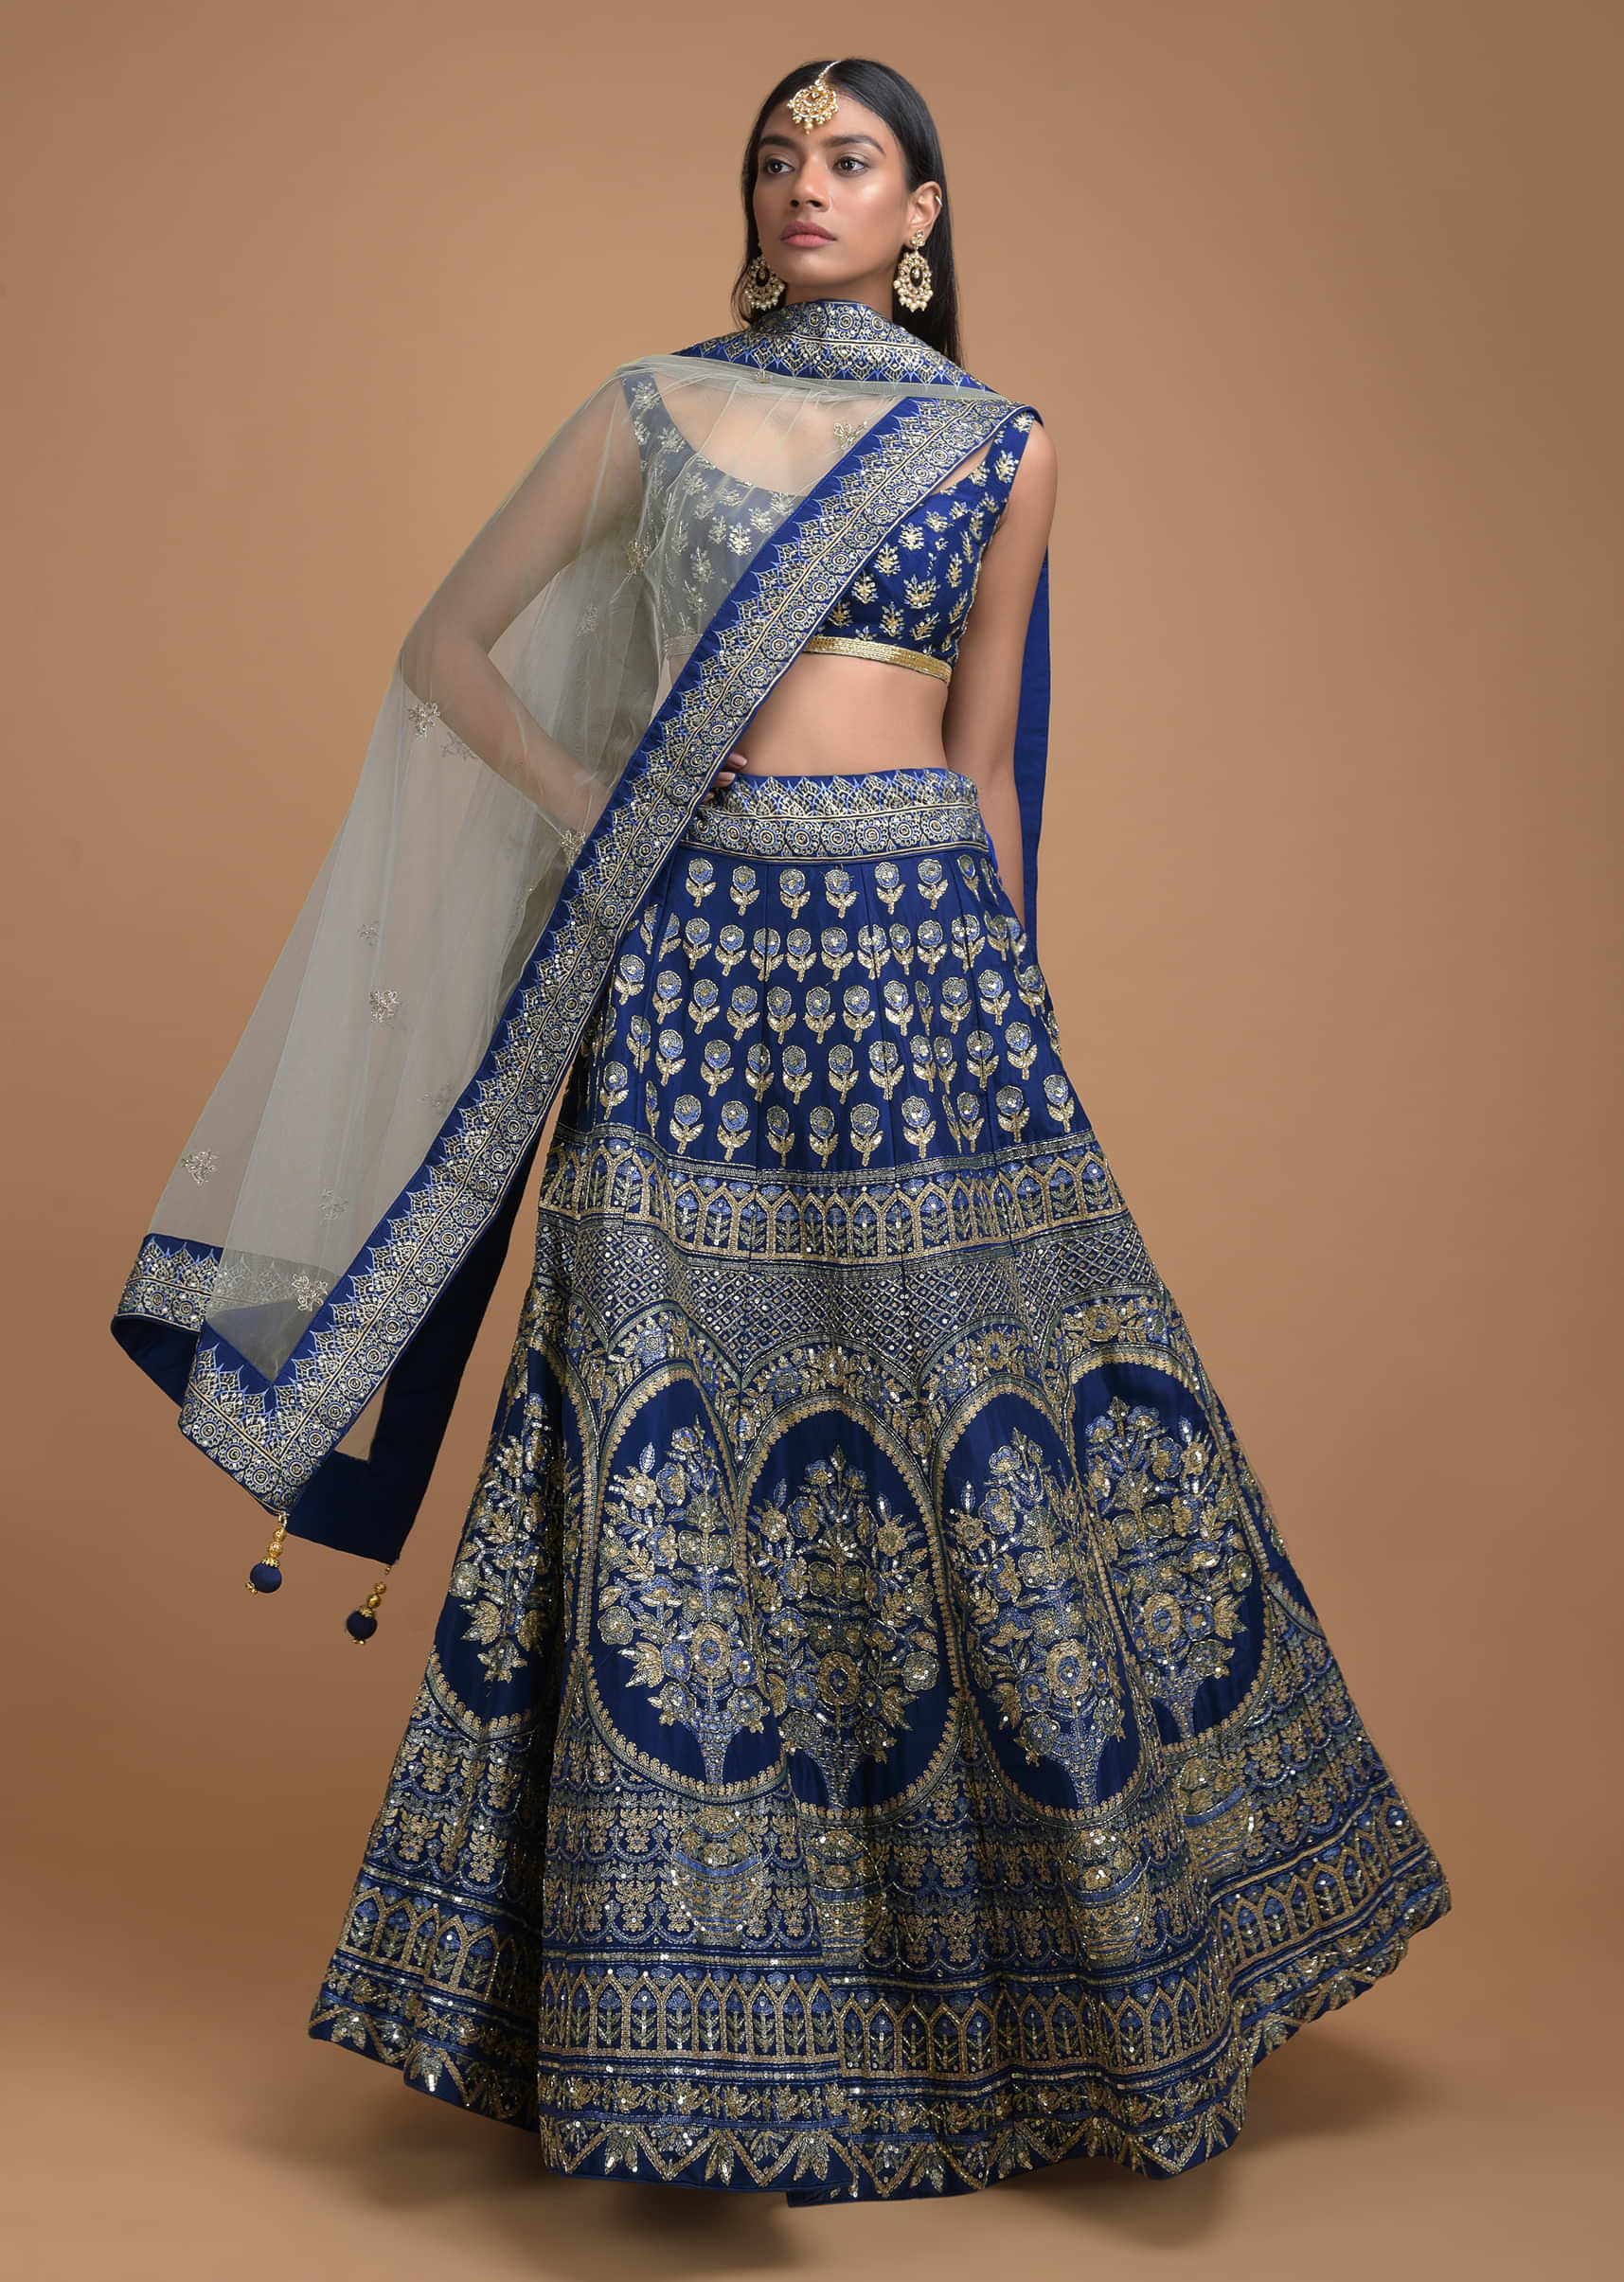 Navy Blue Lehenga Choli With Foil Print In Framed Floral Motif And Heritage Pattern 